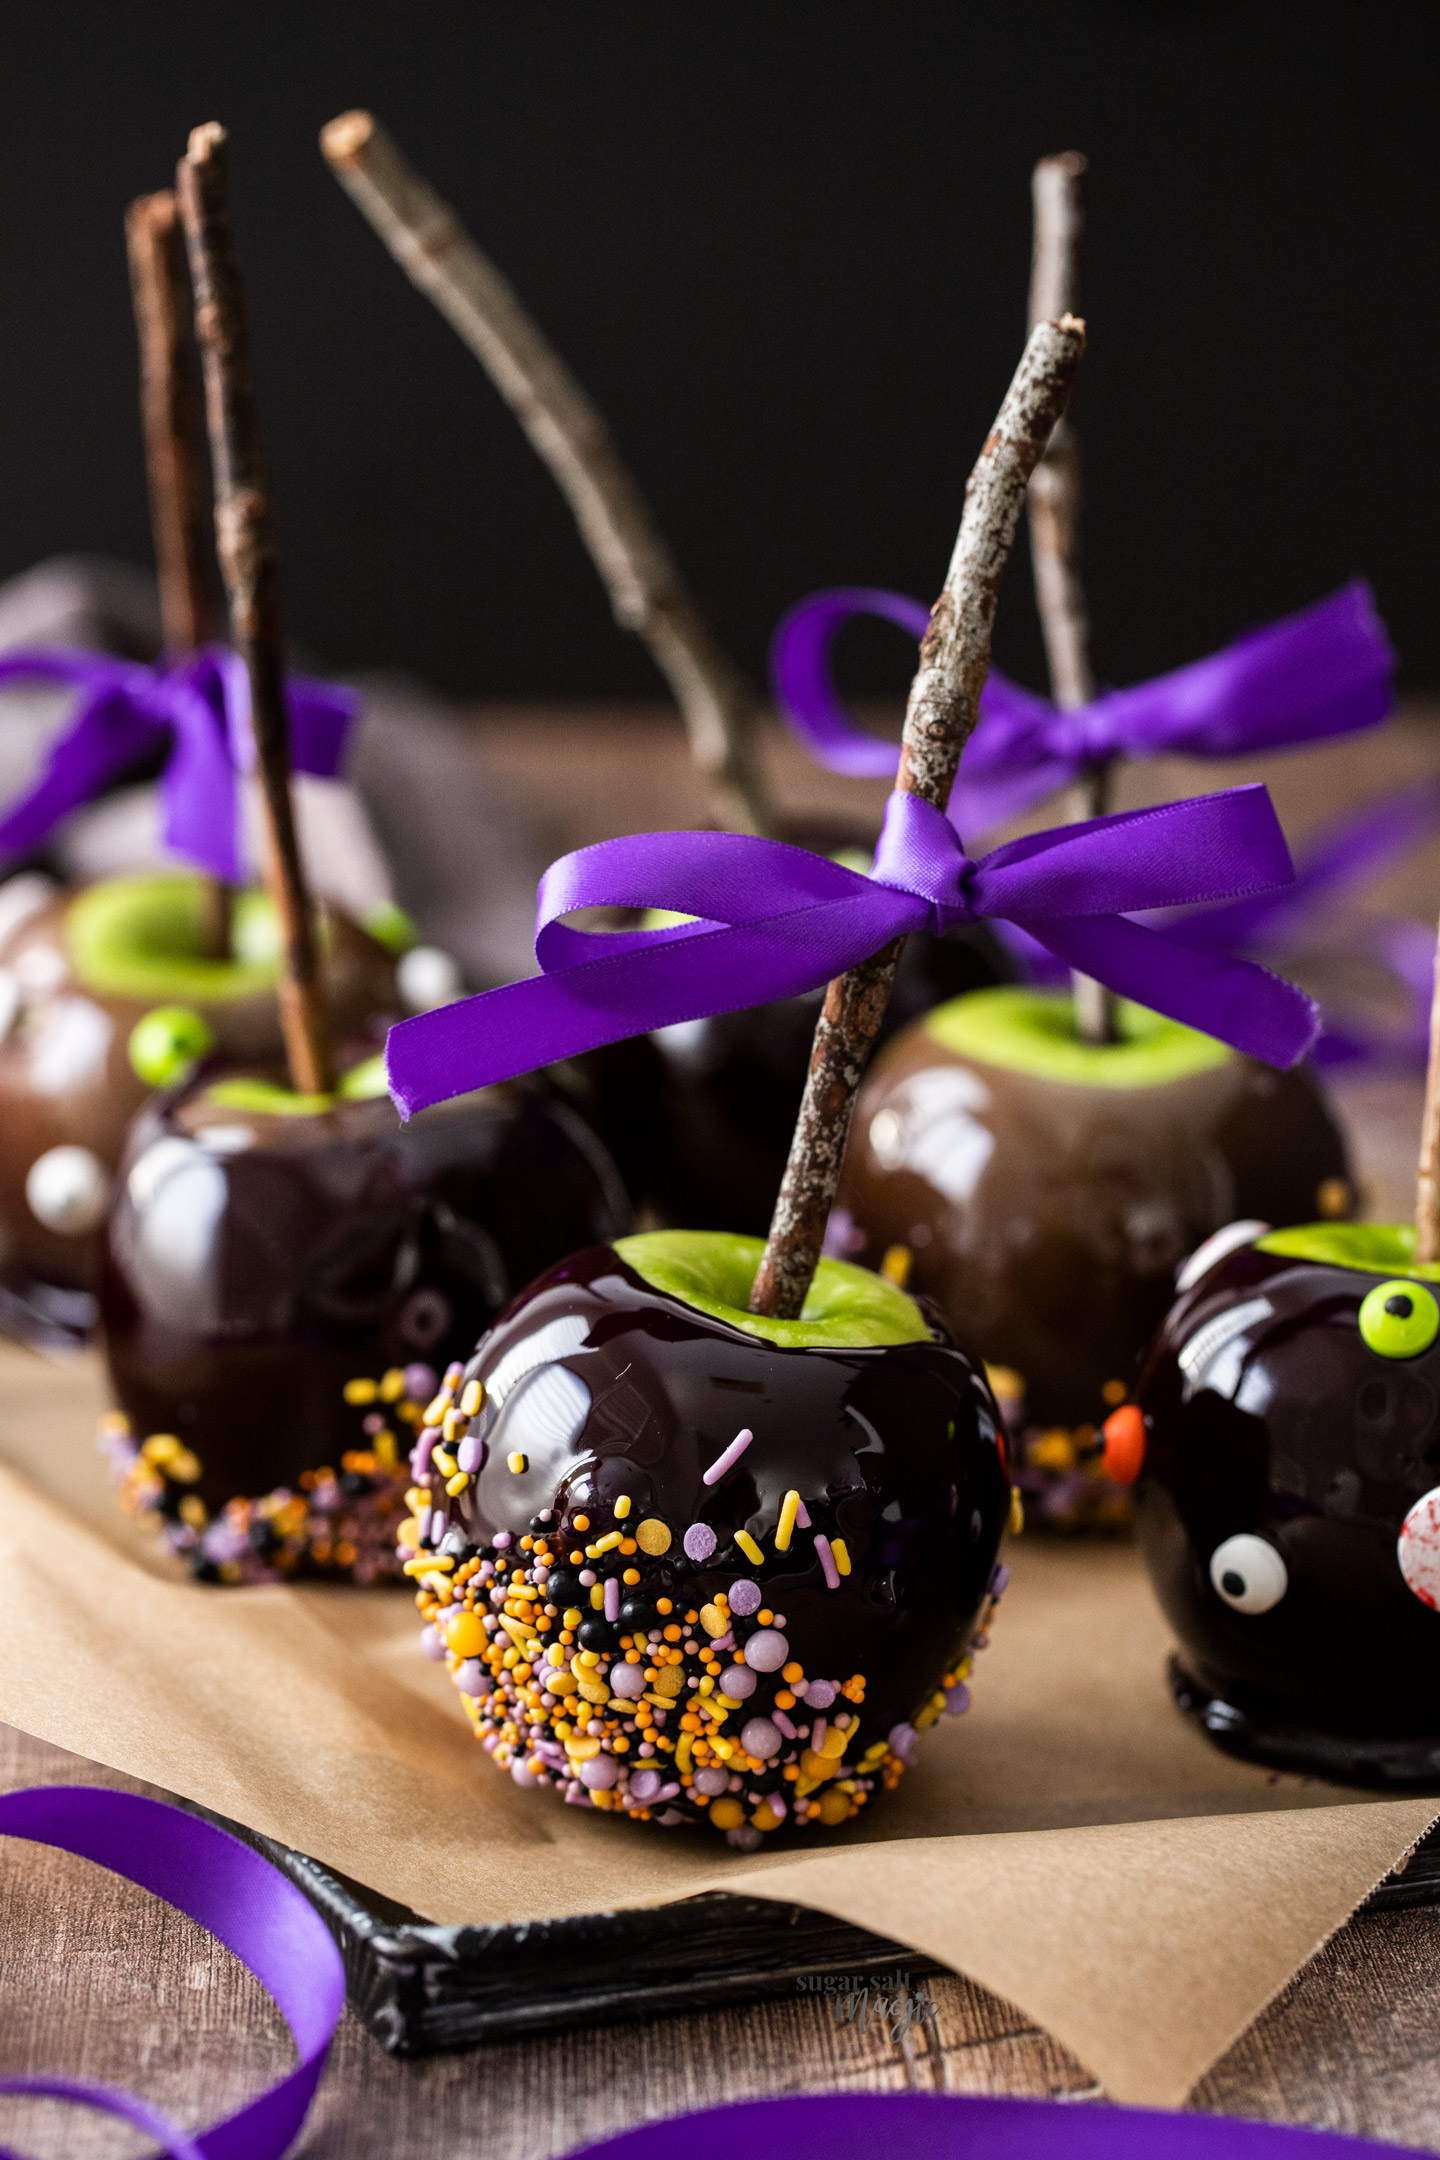 Candy apples on a tray with twigs stuck into the top.